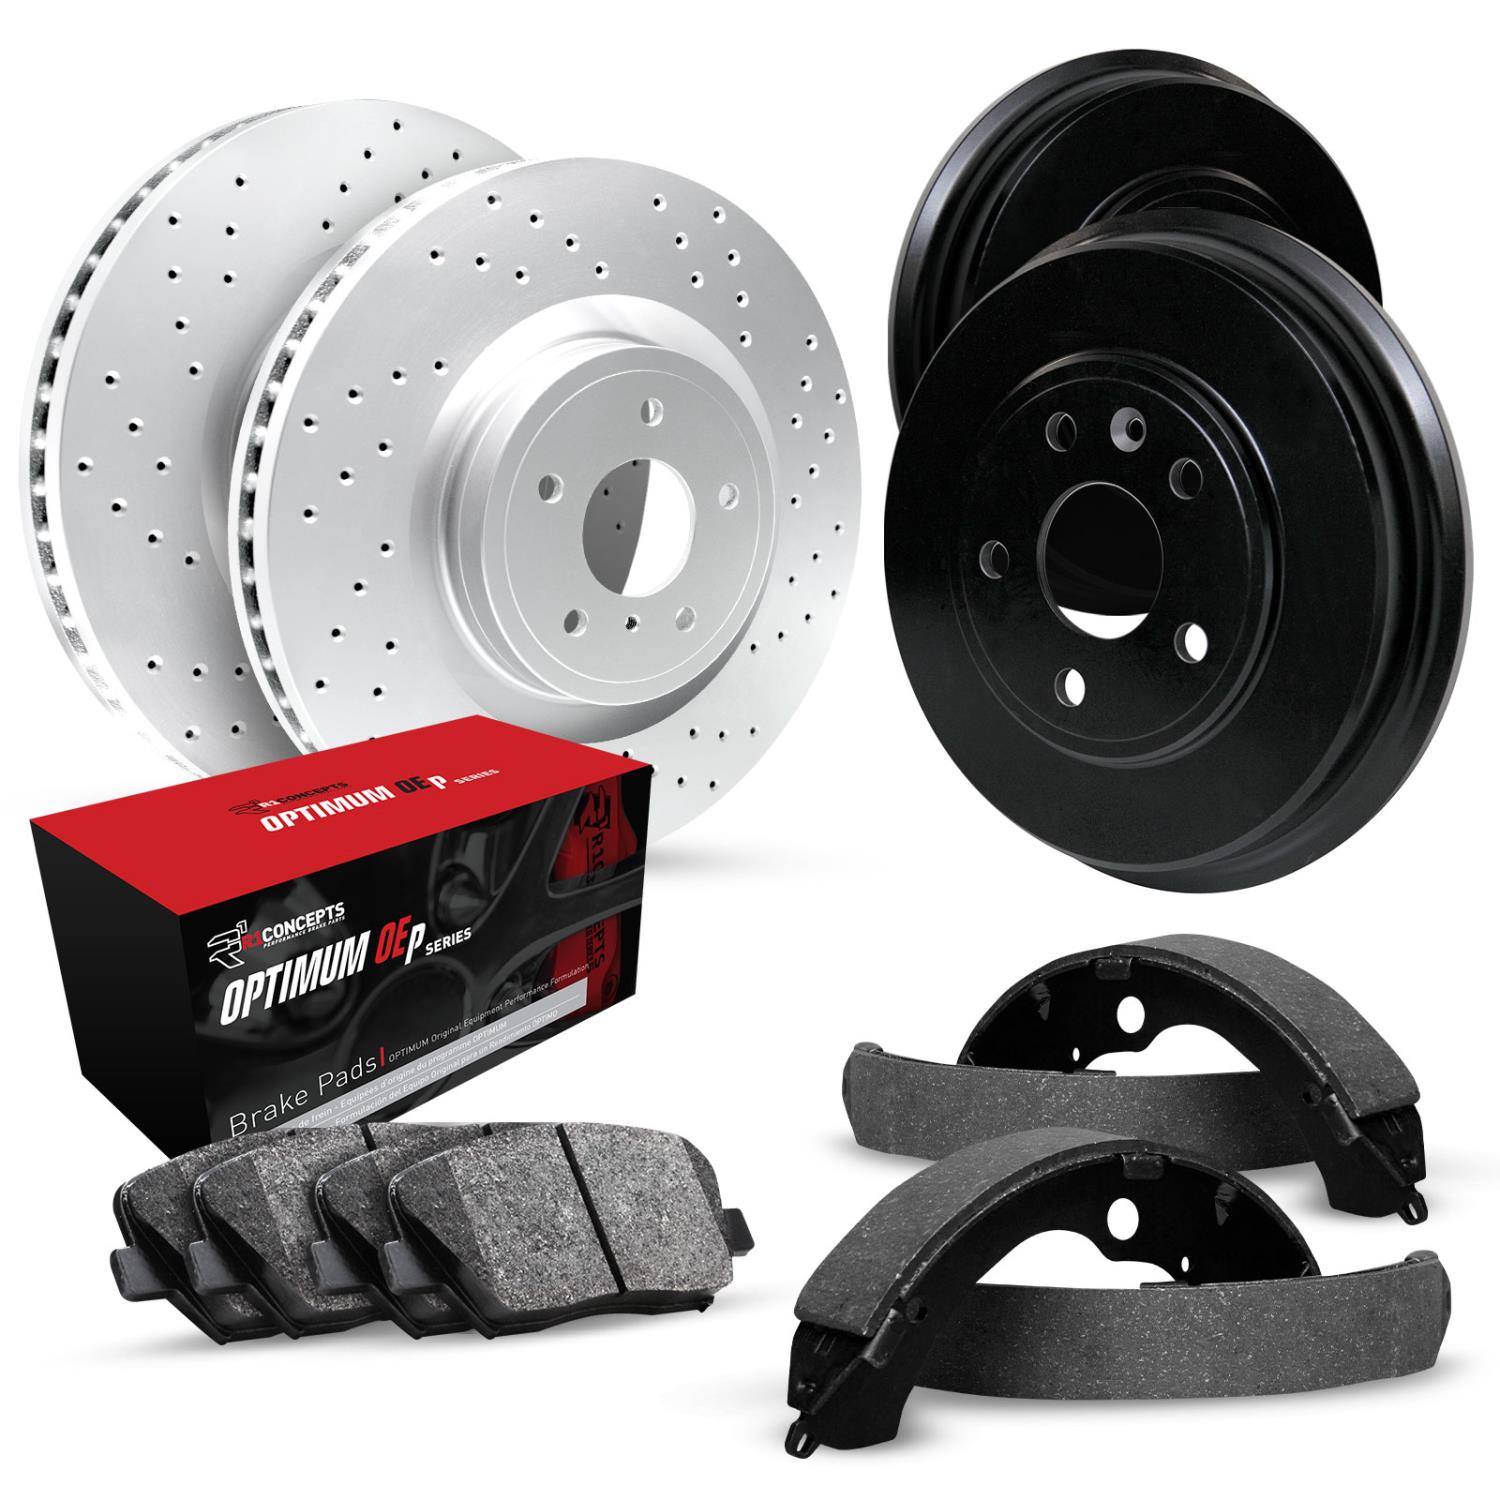 GEO-Carbon Drilled Brake Rotor & Drum Set w/Optimum OE Pads & Shoes, 1981-1984 GM, Position: Front & Rear